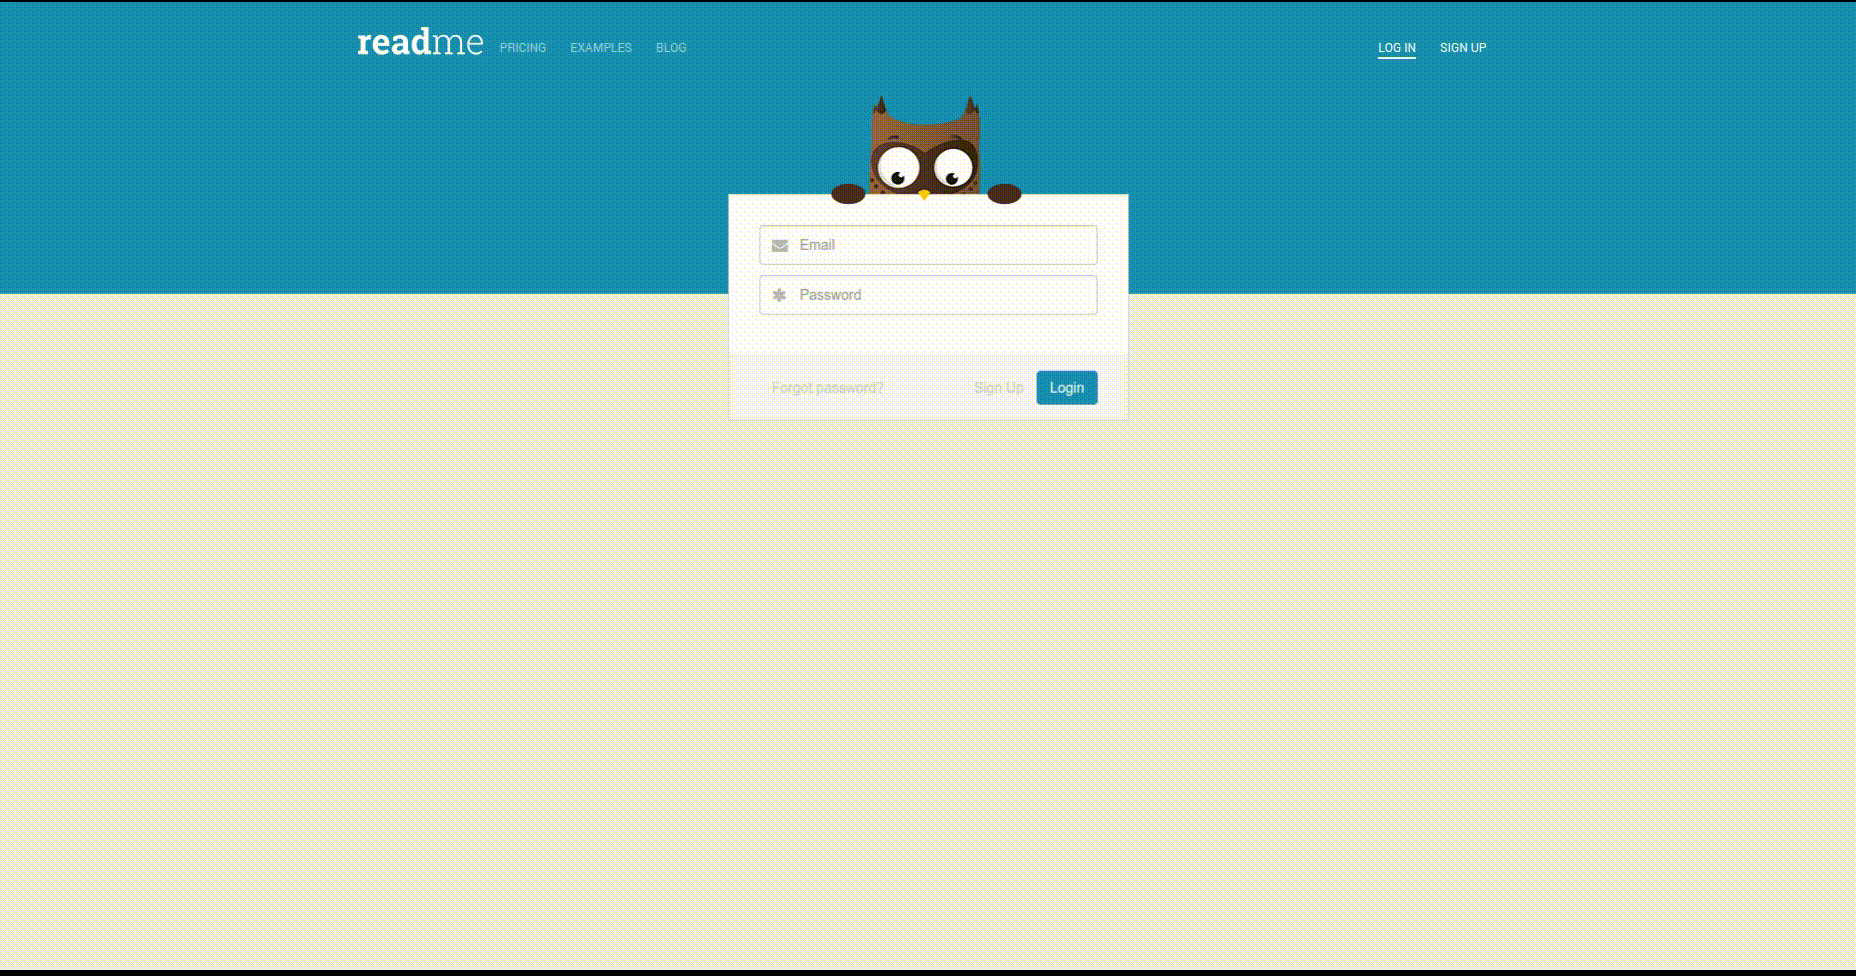 Example of login form on readme.io